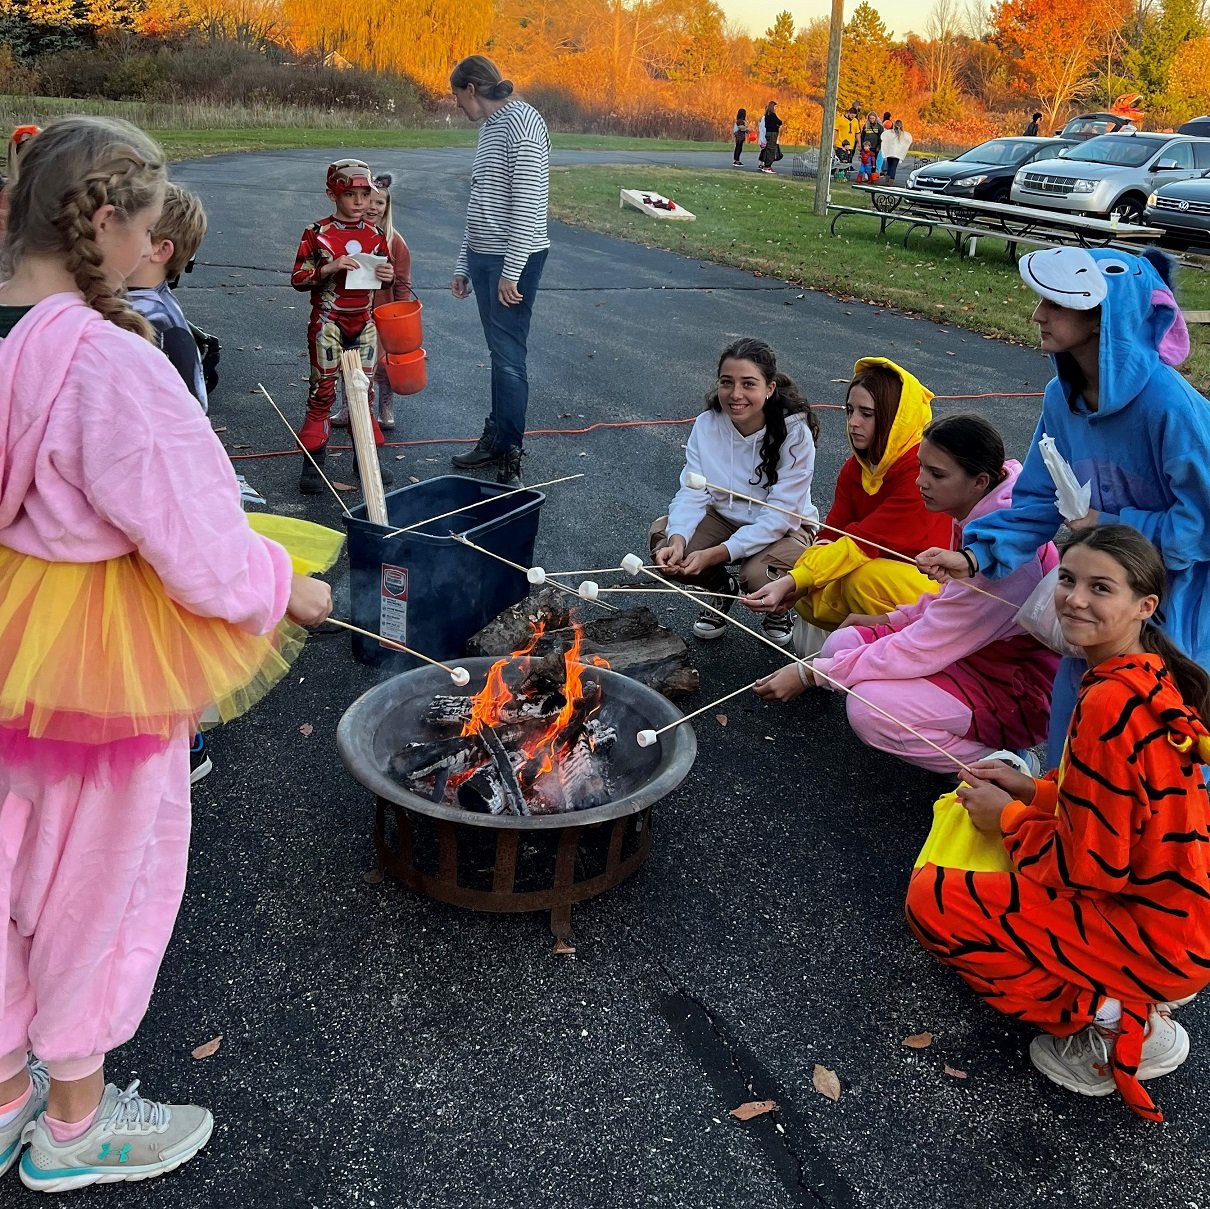 group of kids in costume roasting marshmallows